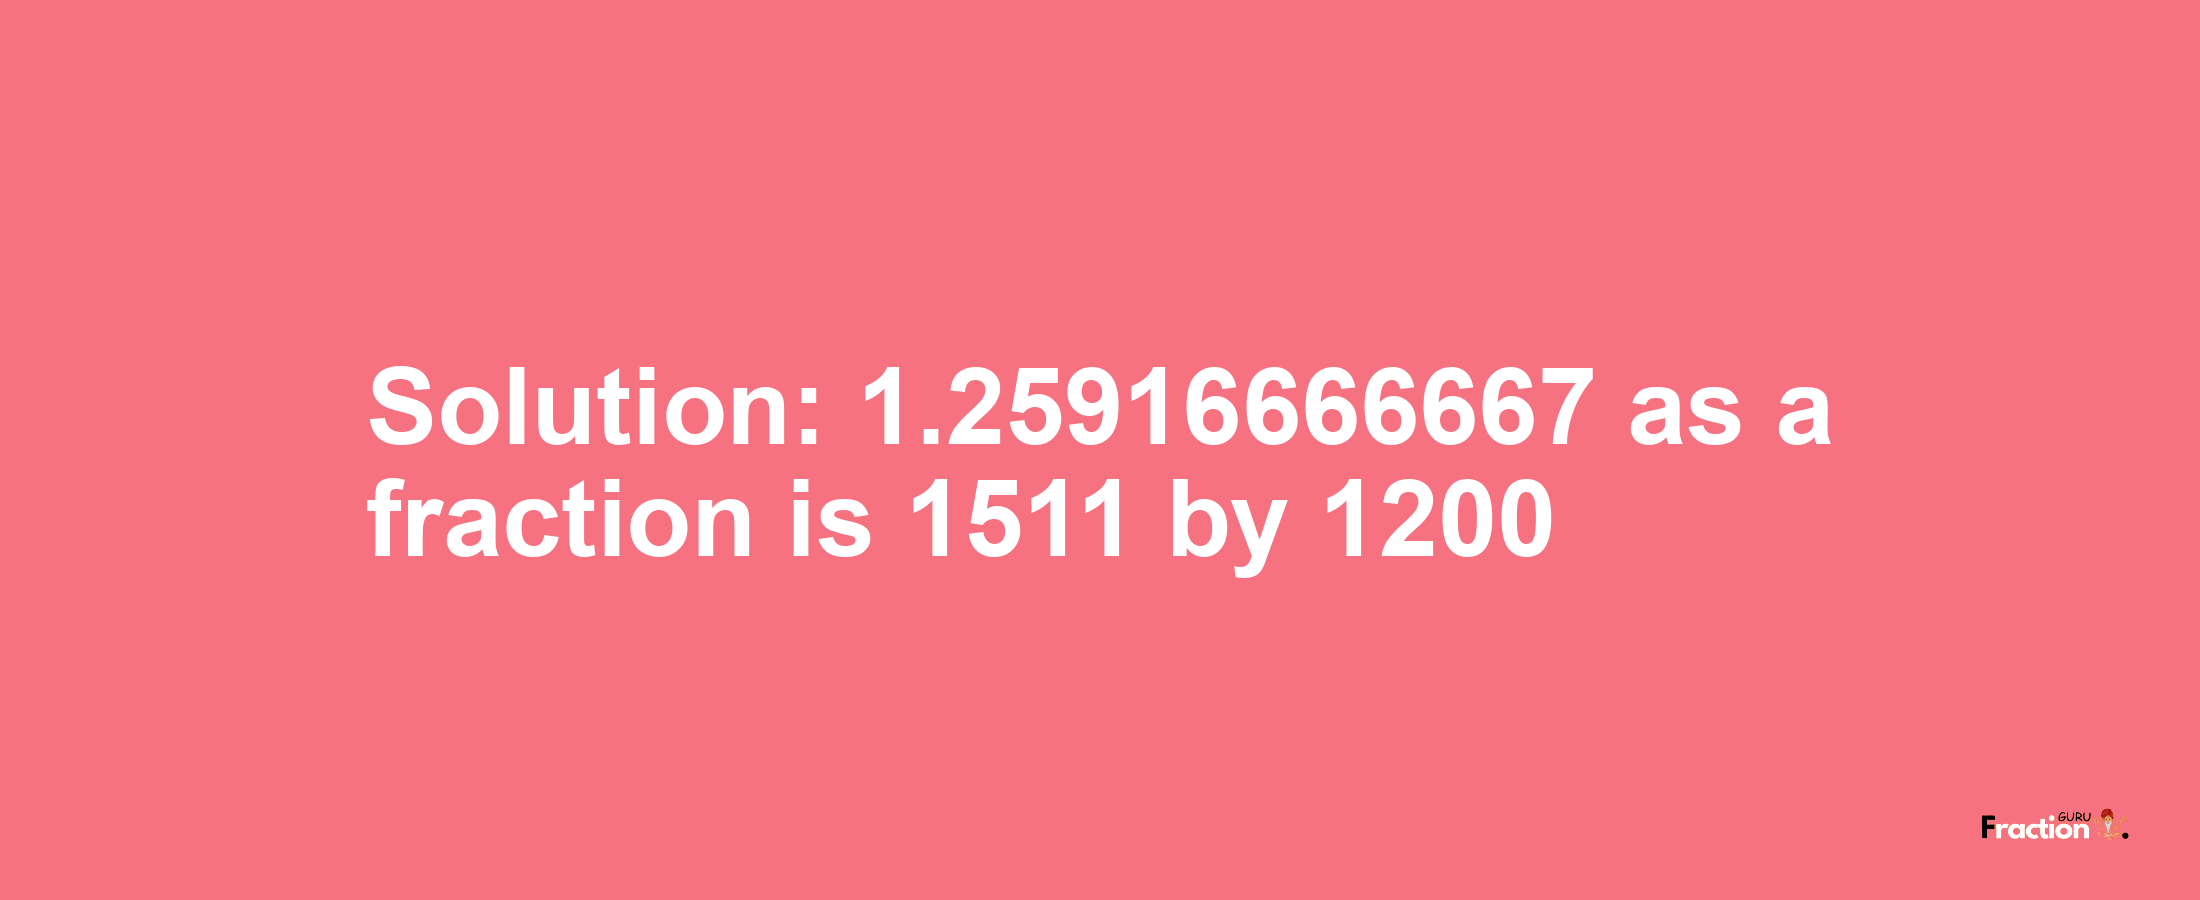 Solution:1.25916666667 as a fraction is 1511/1200